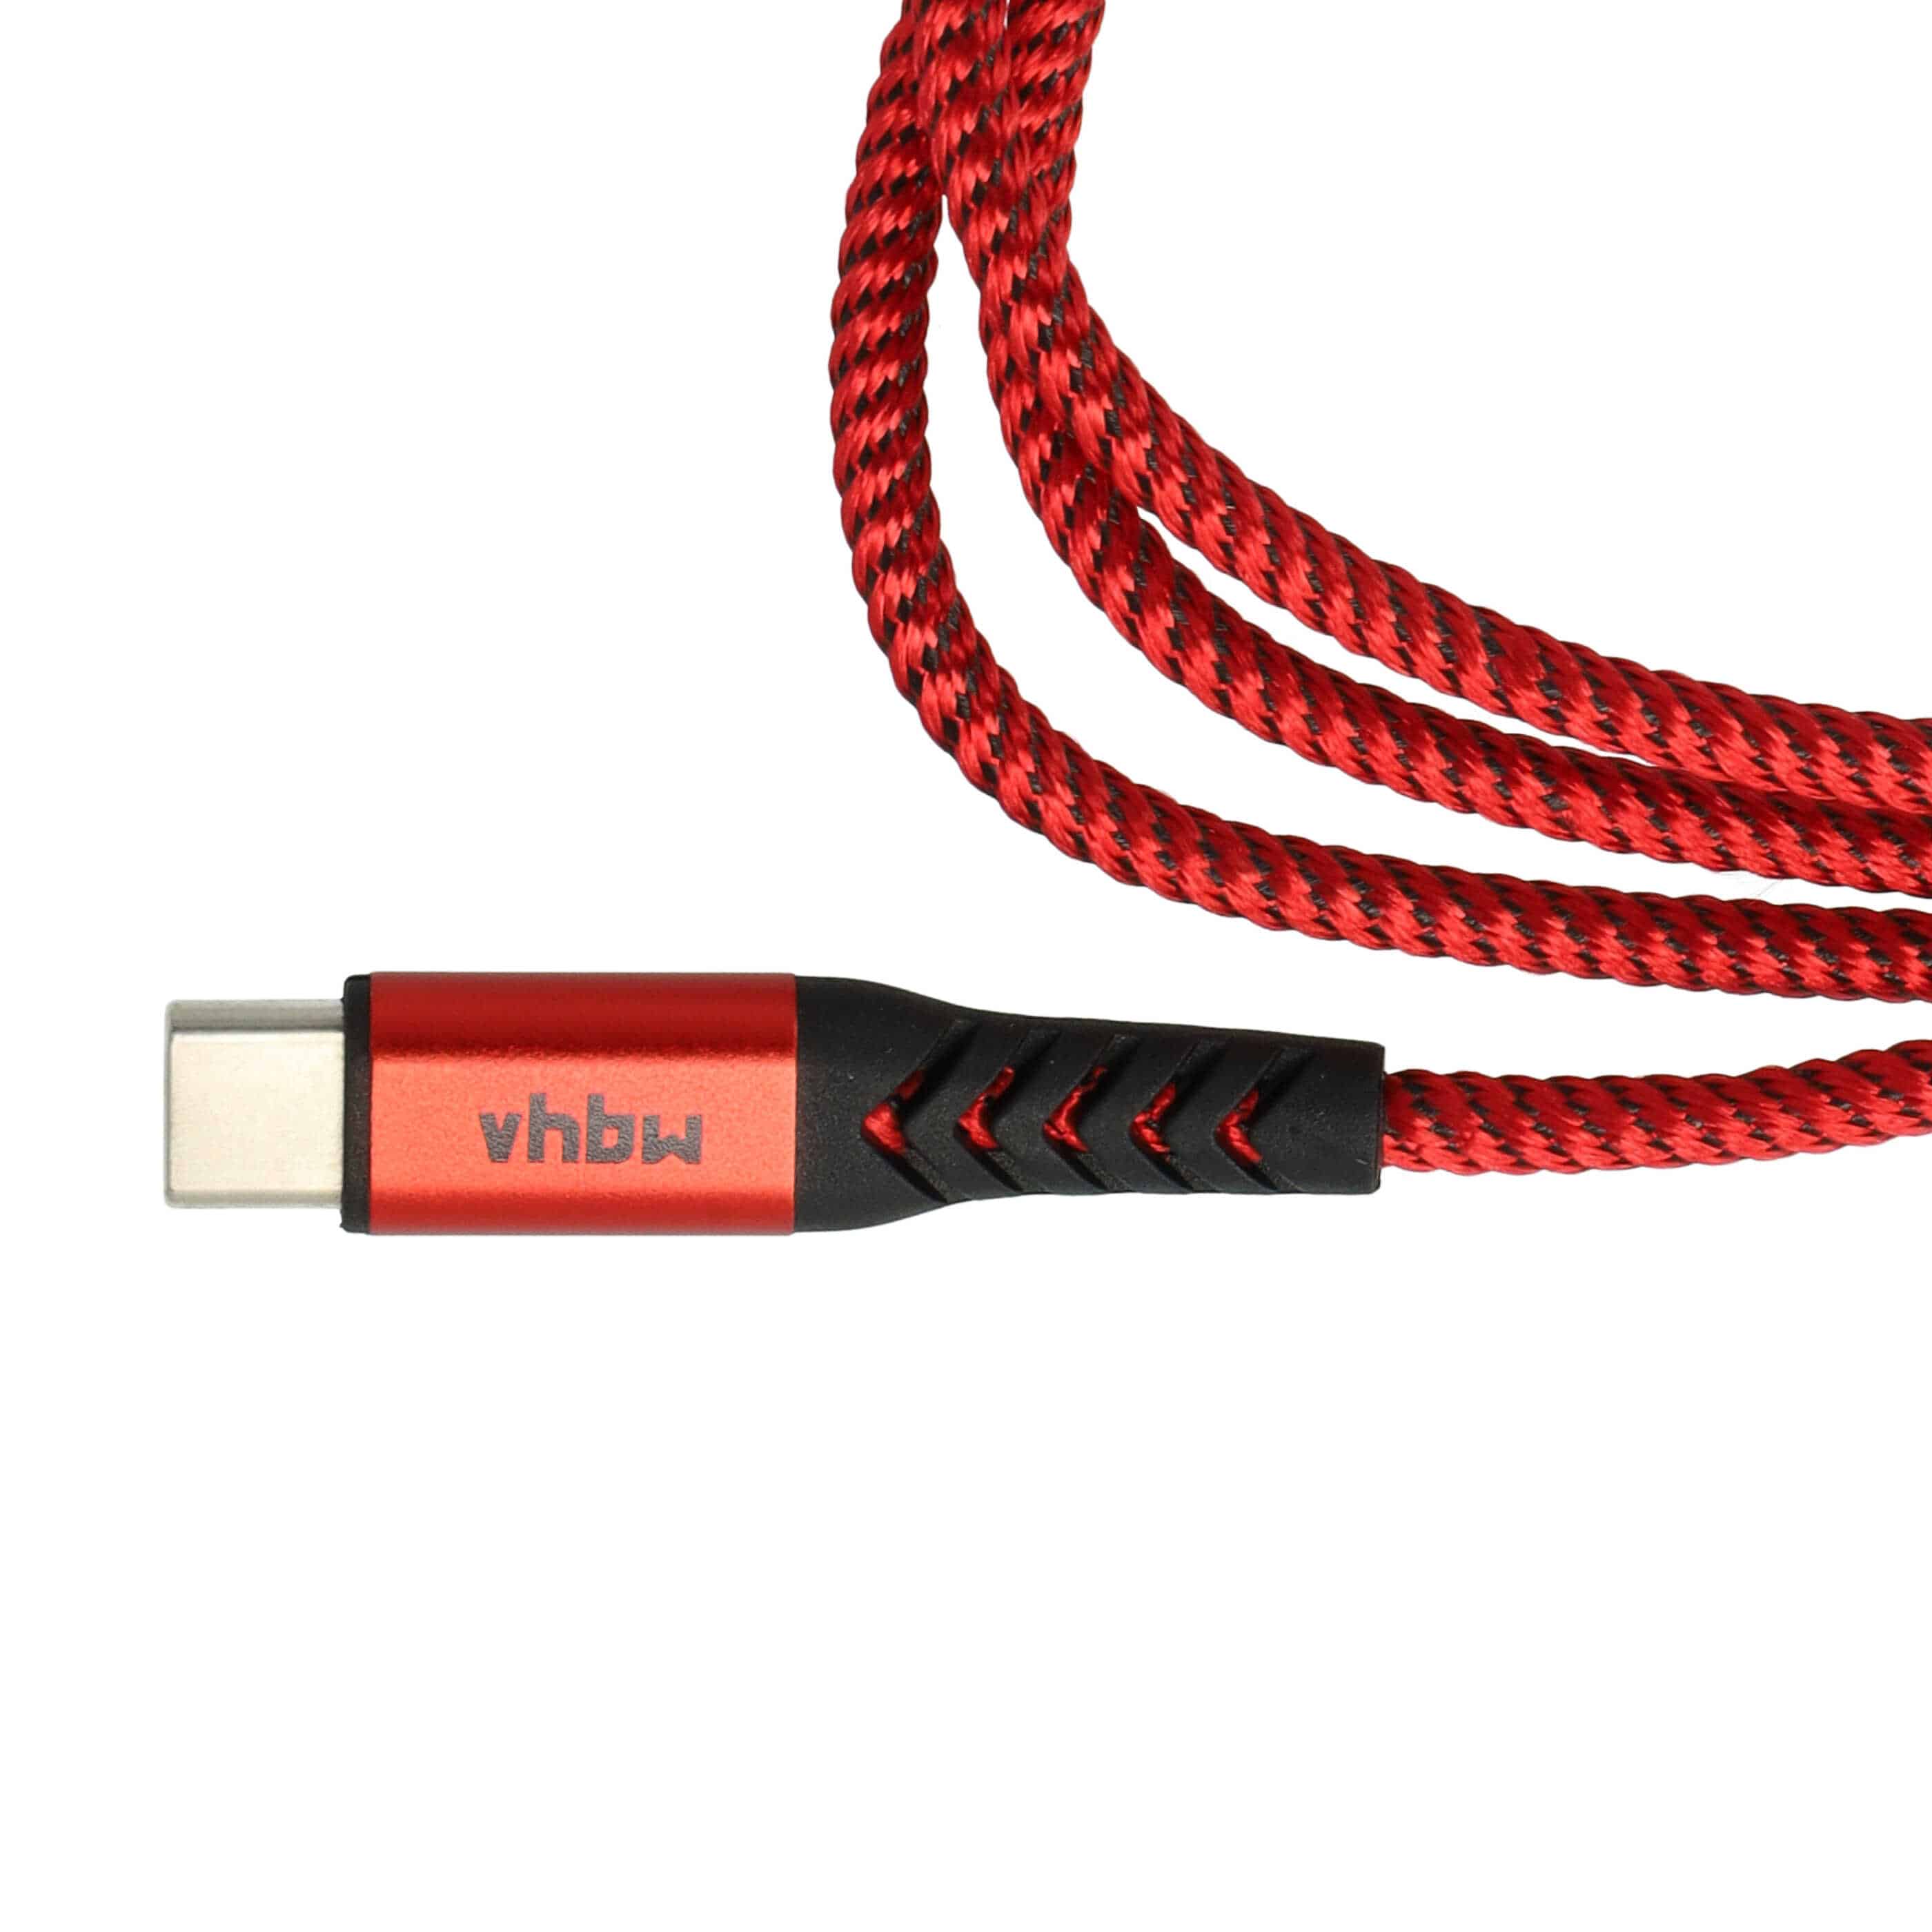 Lightning Cable - USB C, Thunderbolt 3 suitable for Retina, 12" 2015-2017 Apple iOS - Red Black, 100cm